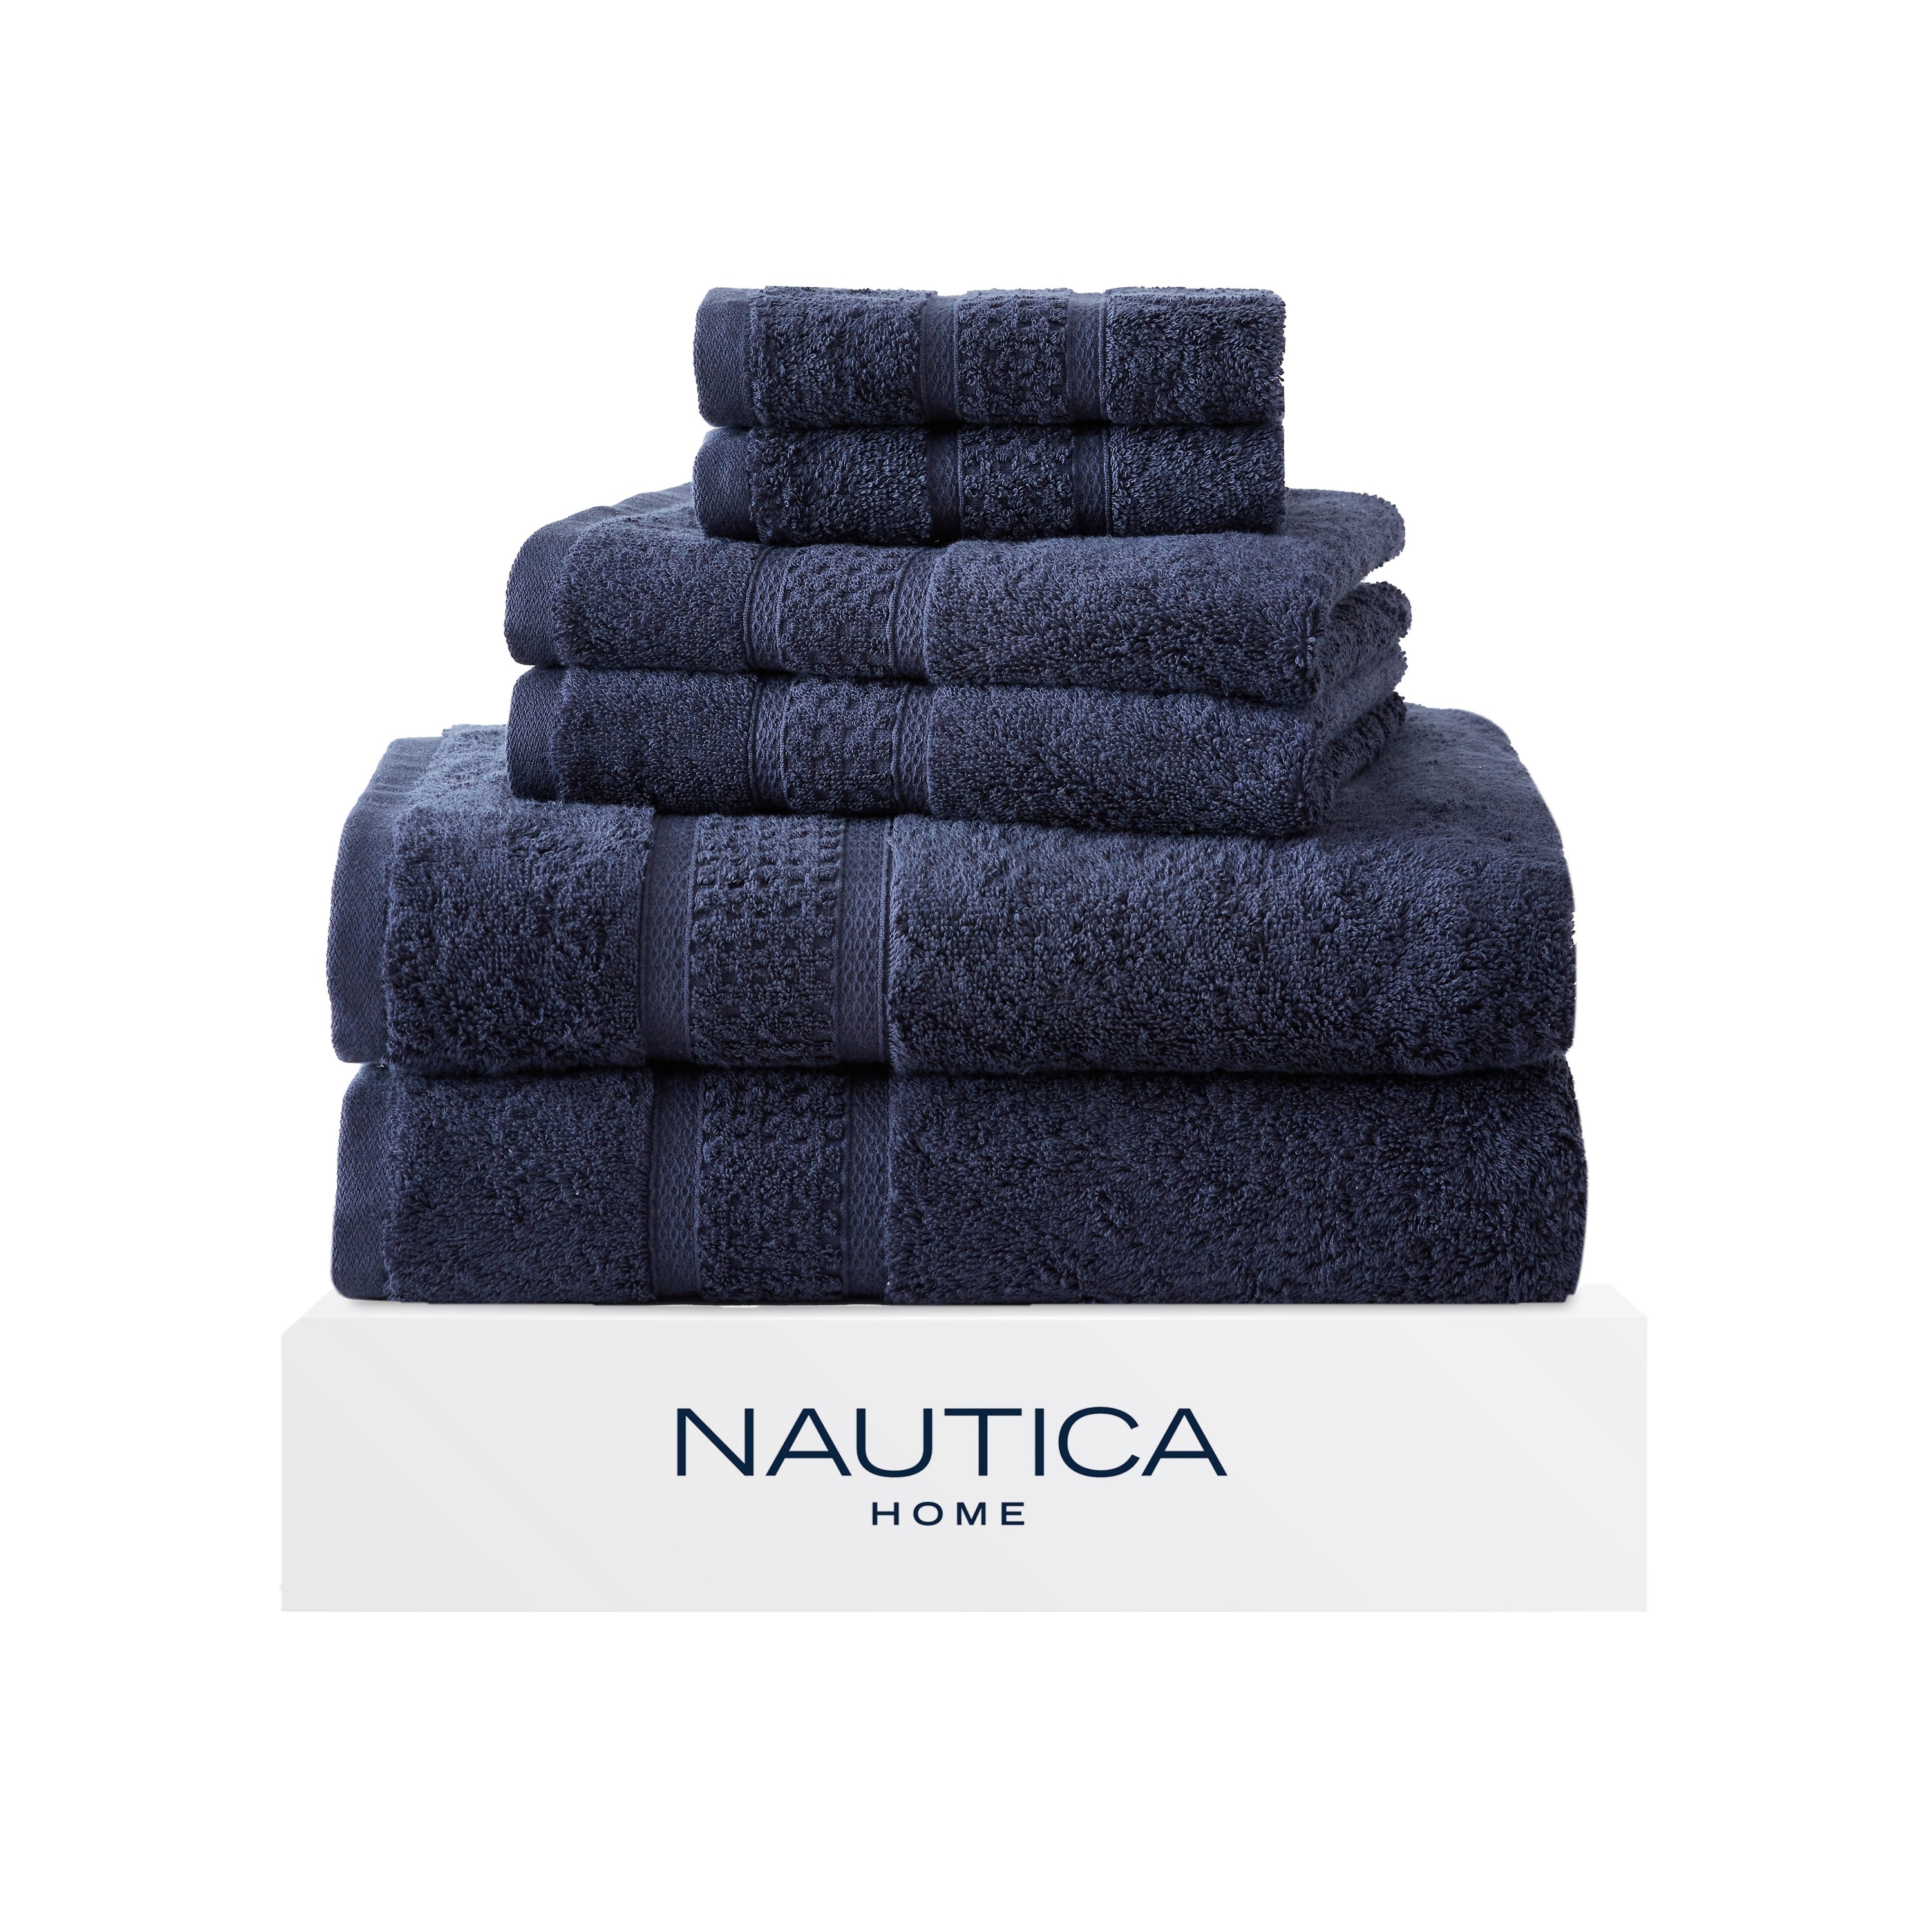 https://ak1.ostkcdn.com/images/products/is/images/direct/7b0cdf5777aec6726b74ee0b48a435907484b751/Nautica-Oceane-Solid-Cotton-6-Piece-Towel-Set.jpg